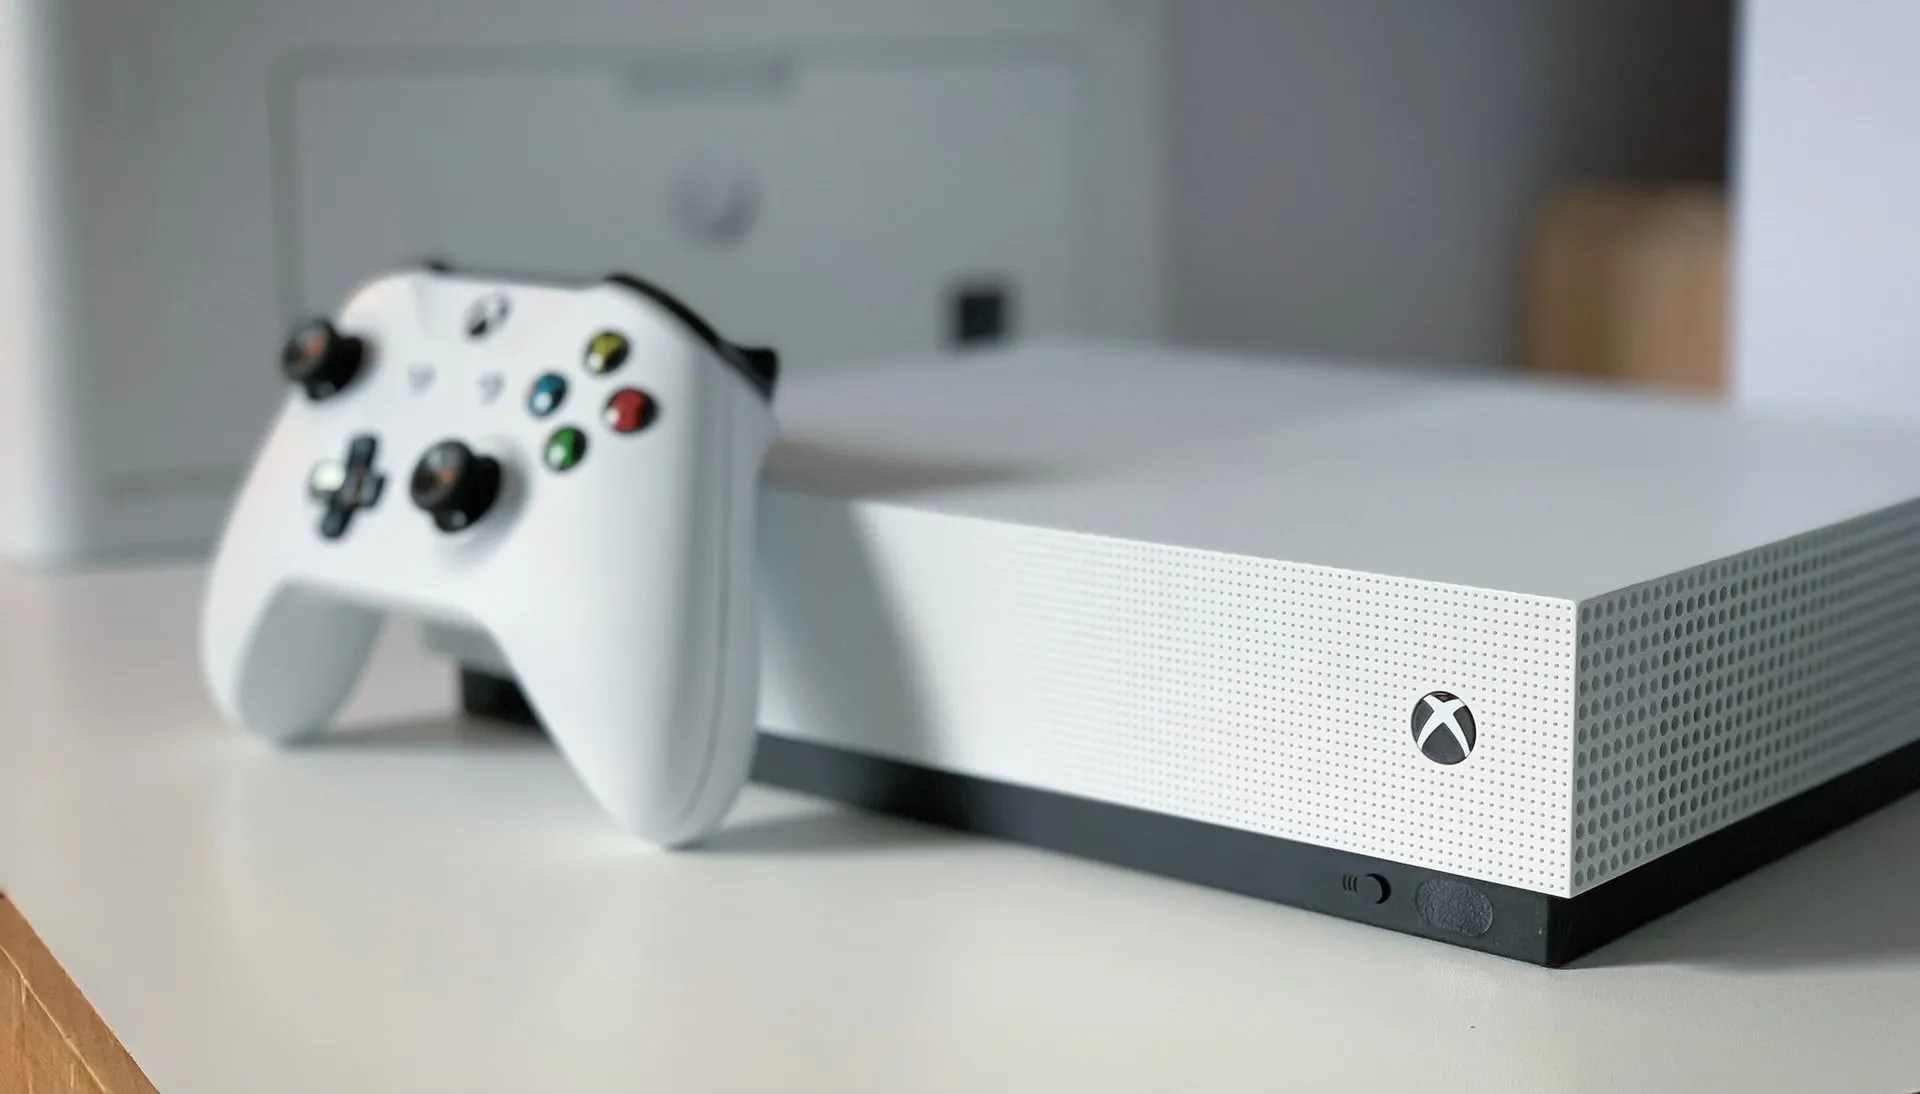 How to Fix Xbox One S HDMI Connected but “No signal” Error